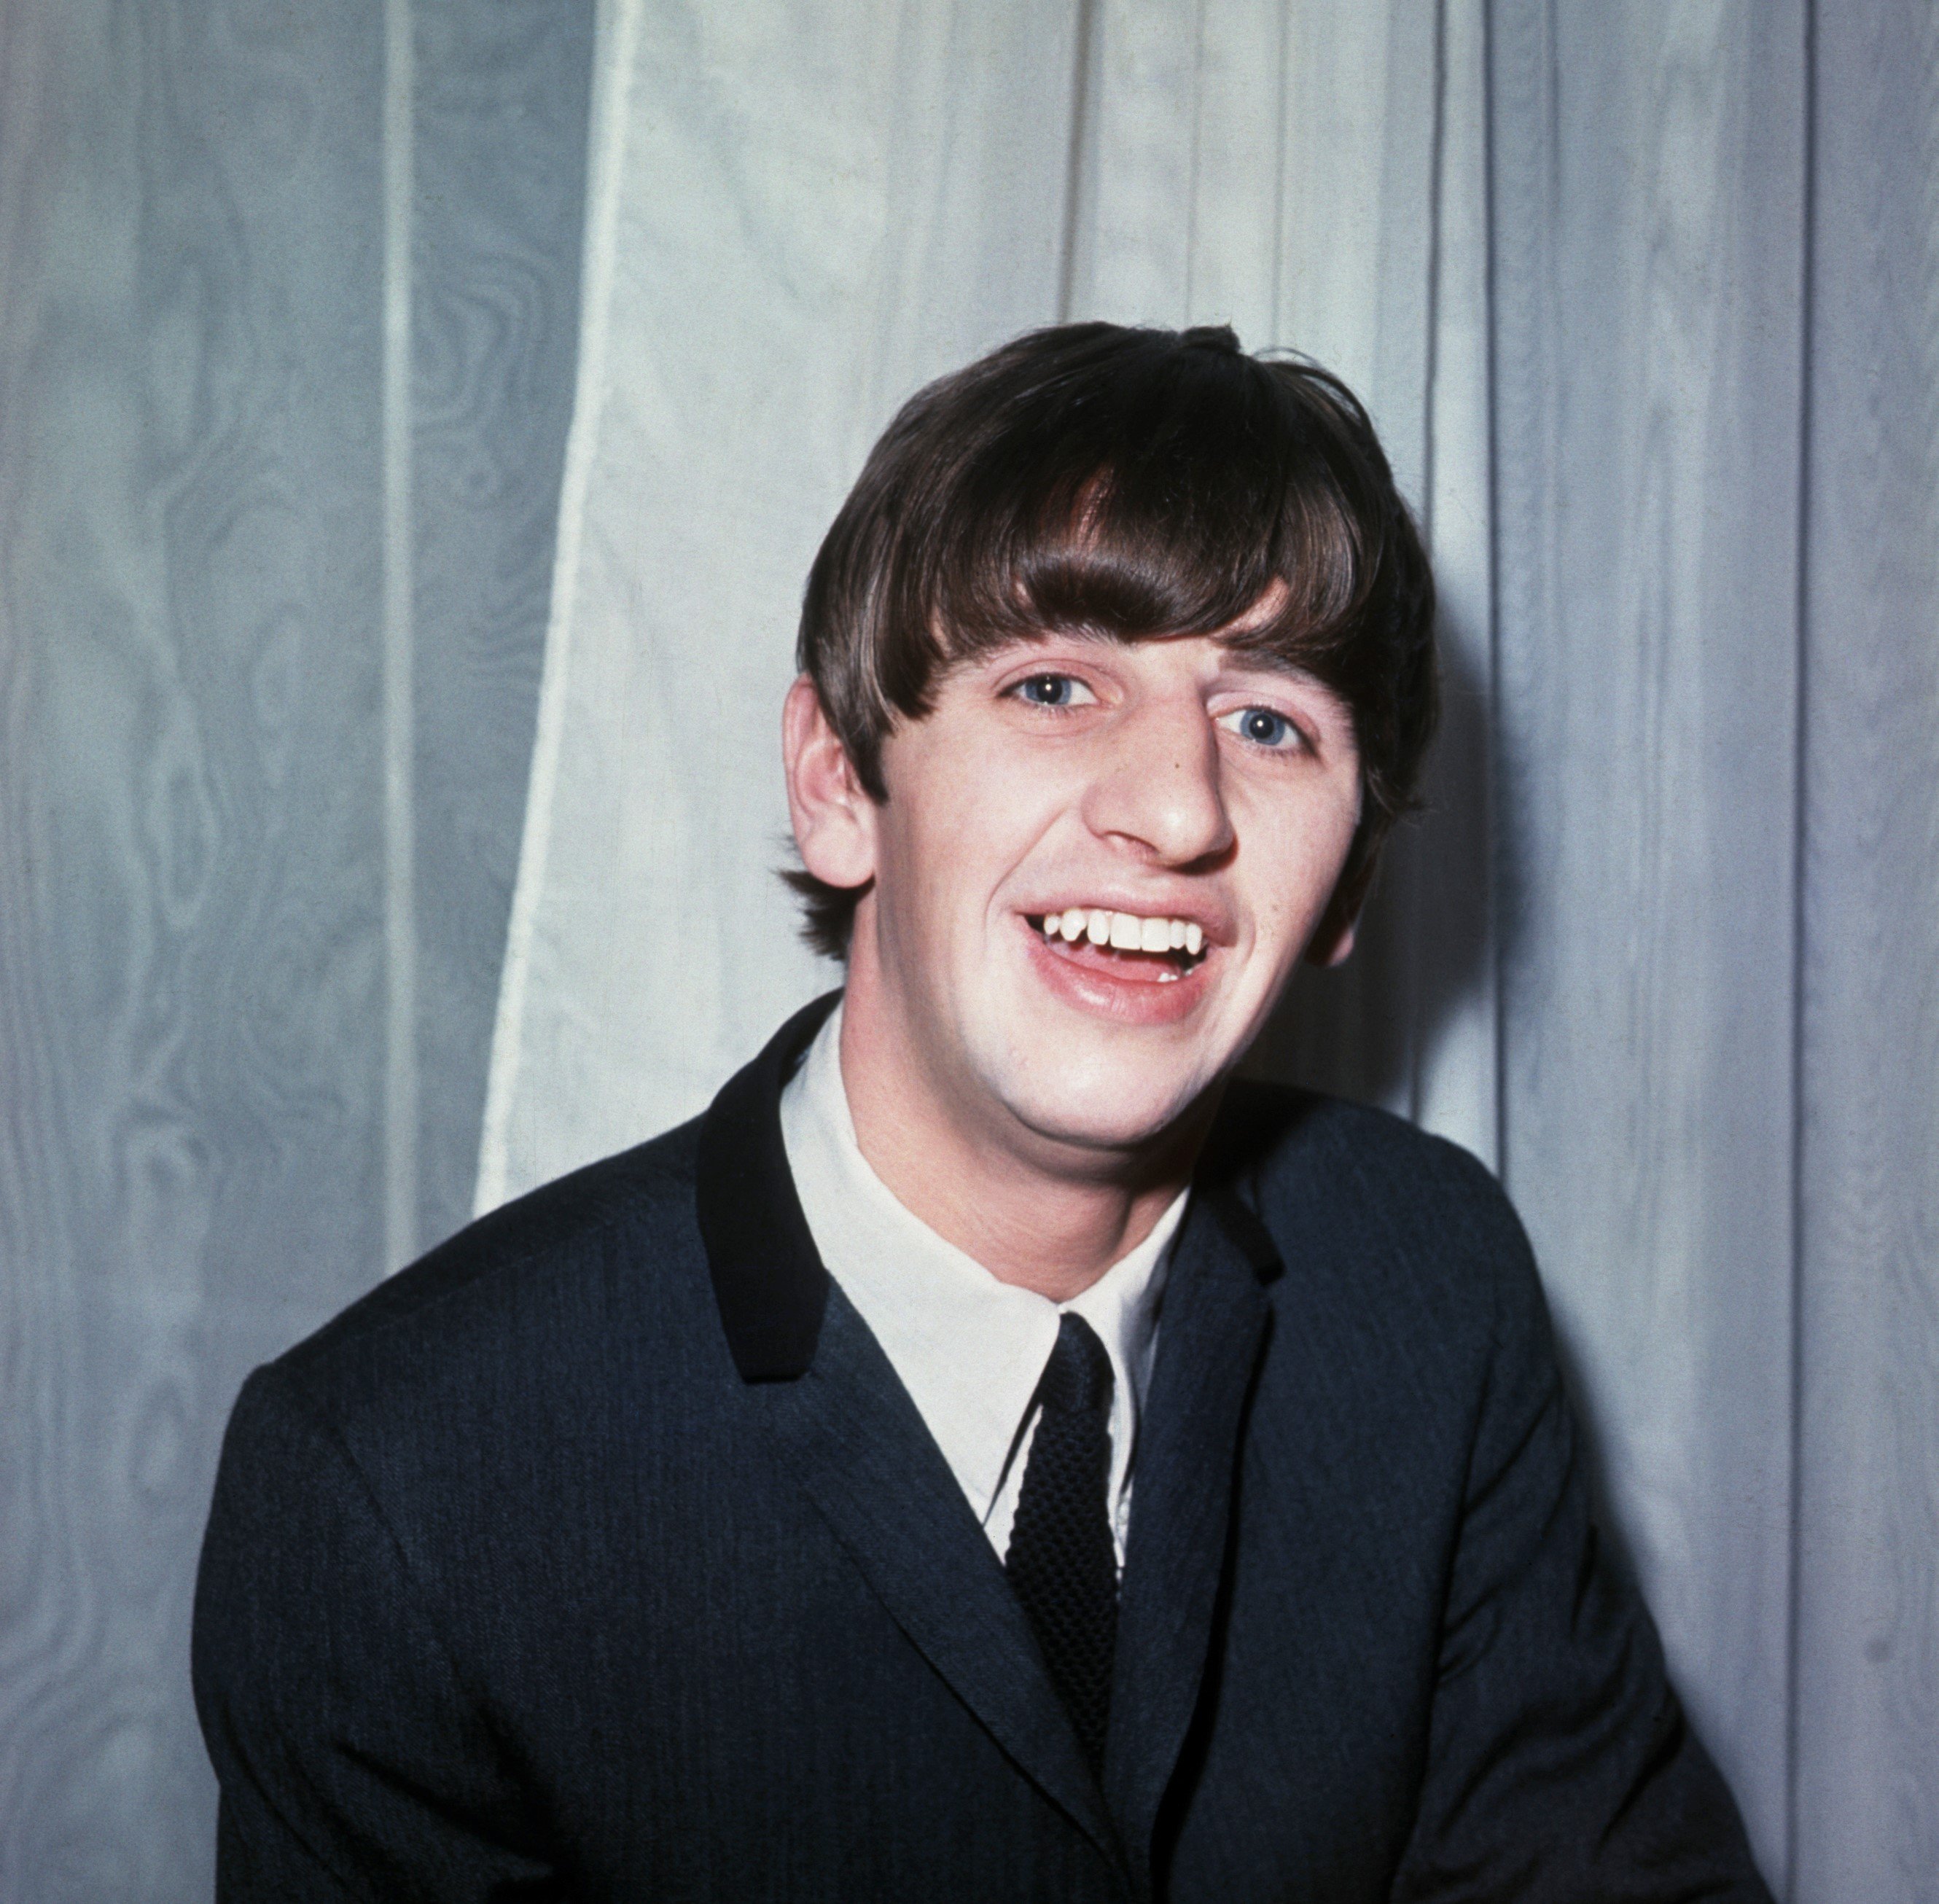 Ringo Starr wears a suit and poses in front of a gray wooden background.